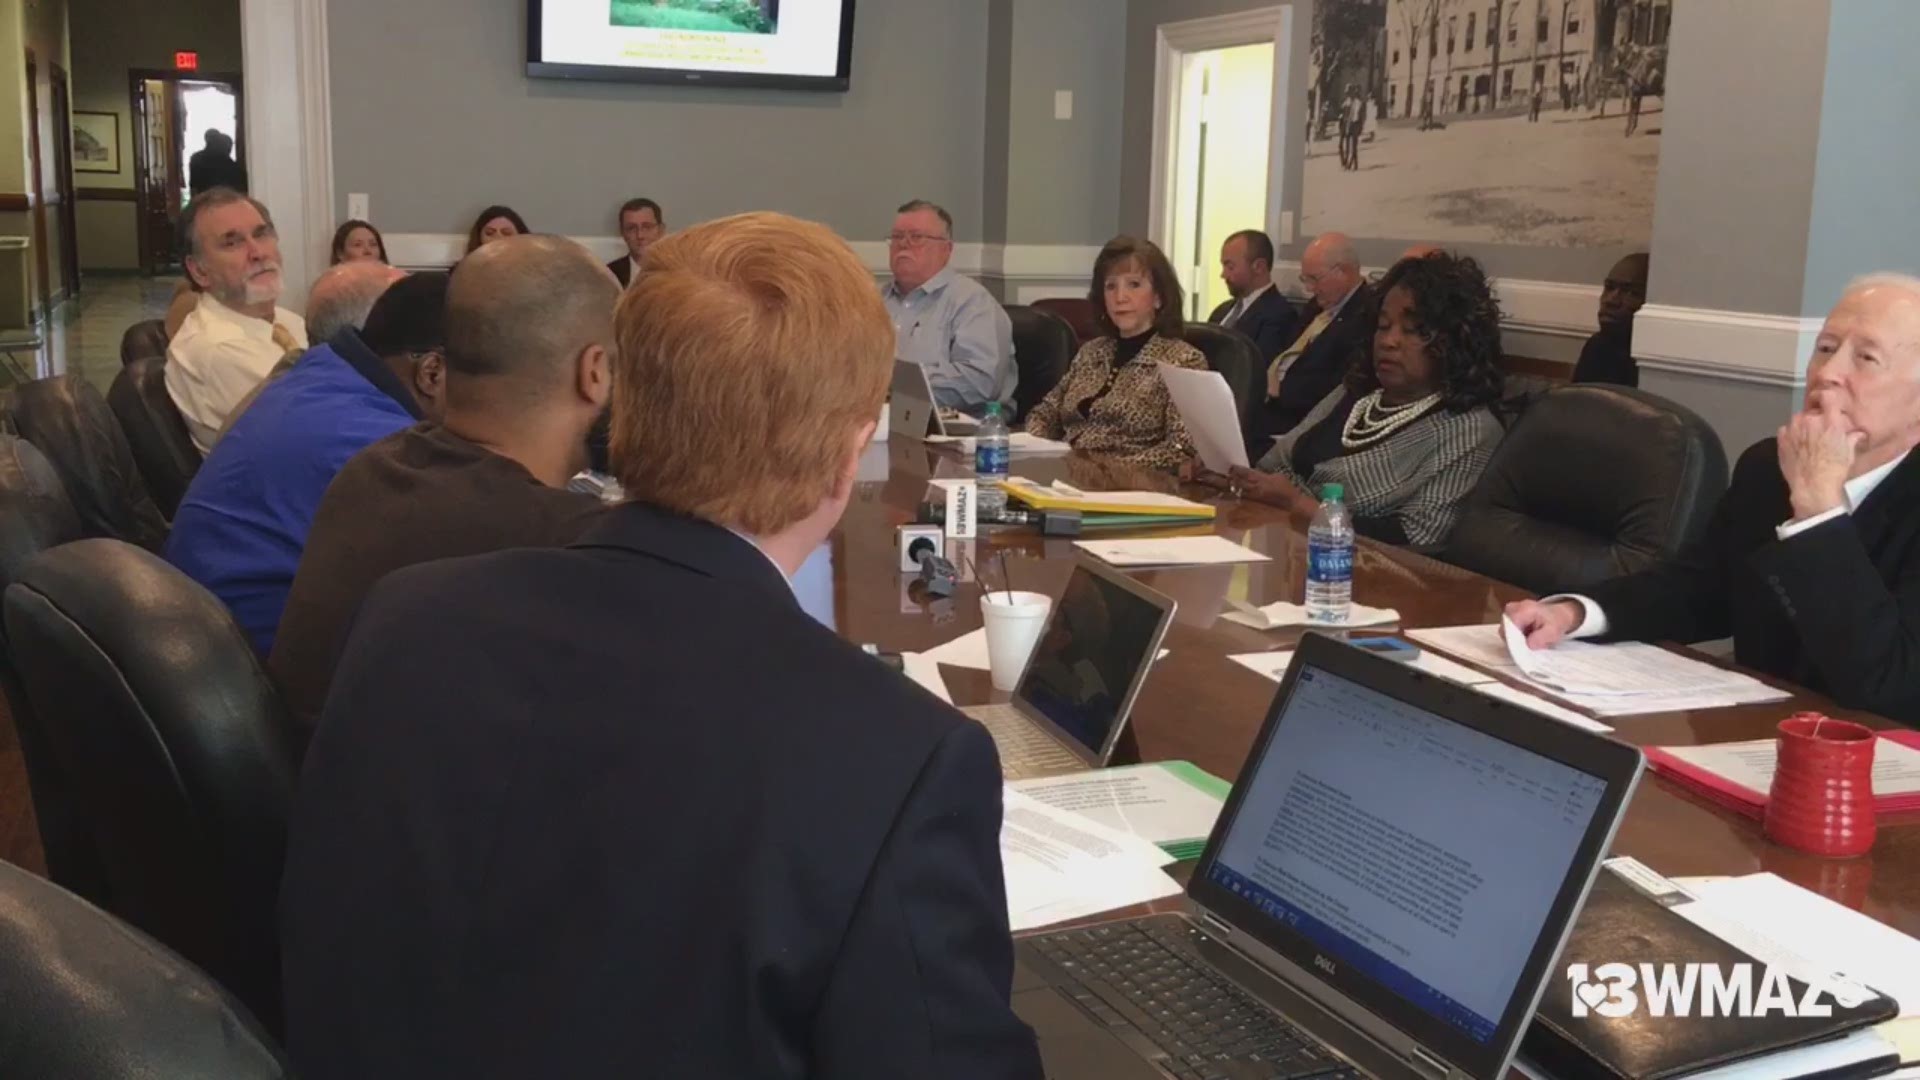 Commissioners put in a memorandum to block Bird from moving into Macon without addressing the commission first